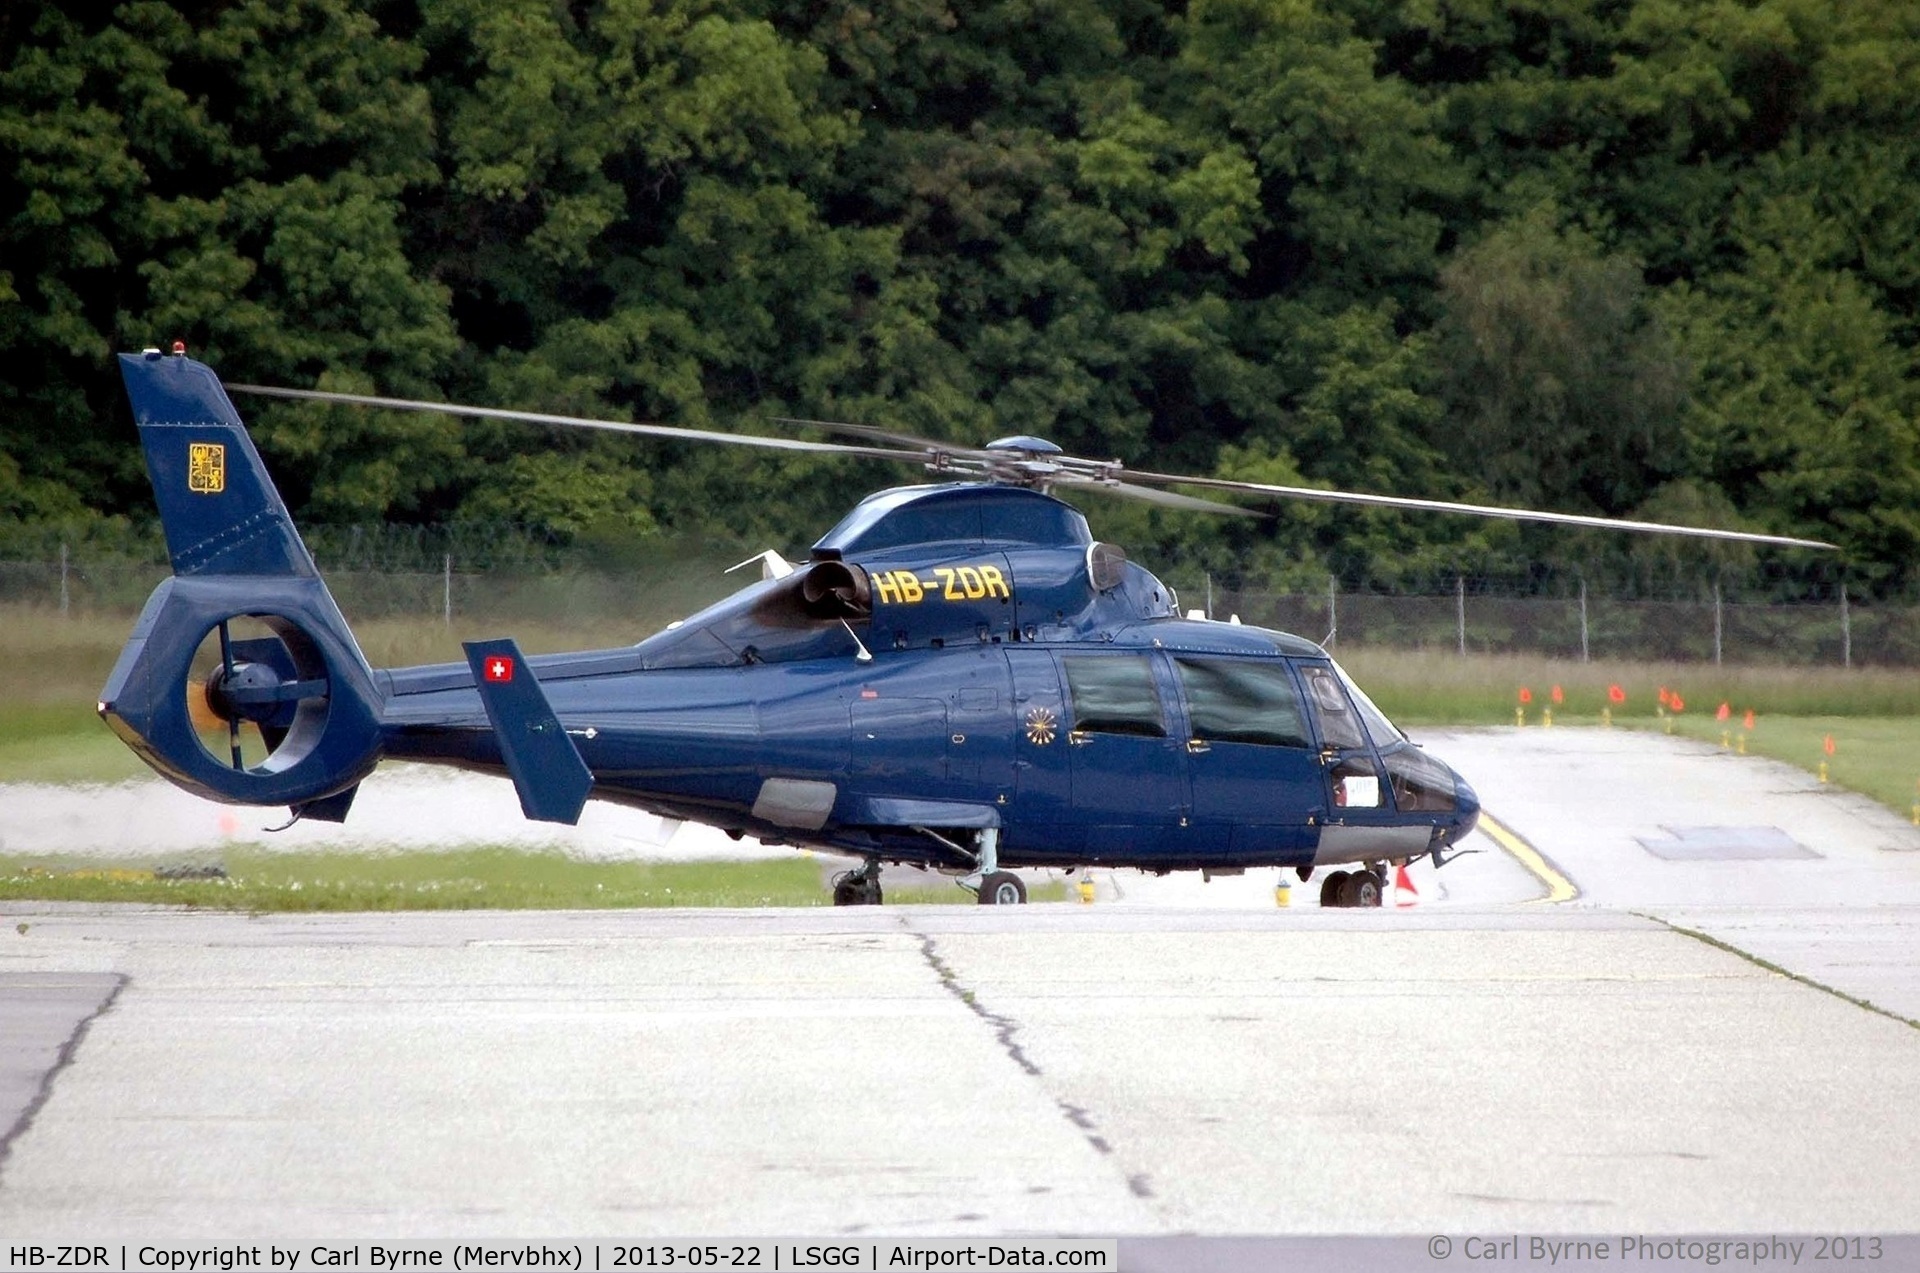 HB-ZDR, 2001 Eurocopter AS-365N-3 Dauphin 2 C/N 6584, Taken from the Aerobistro.